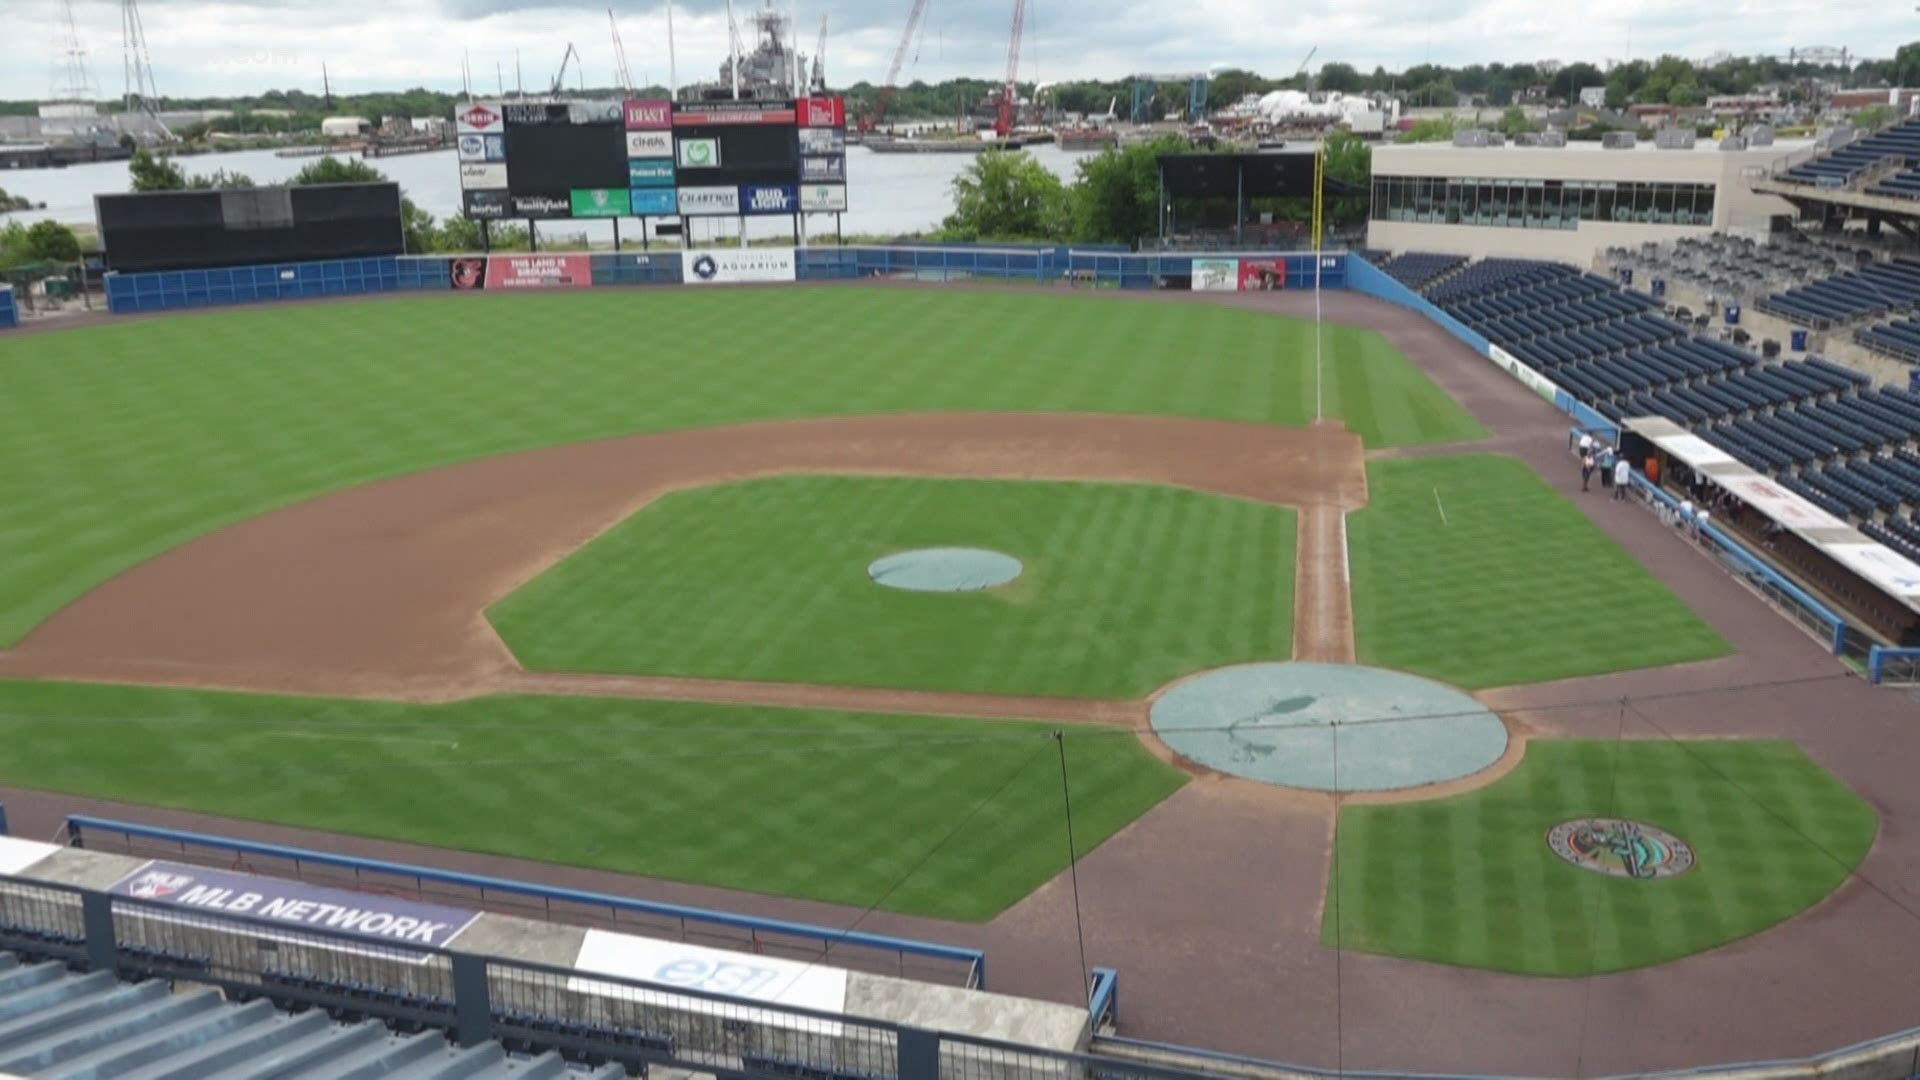 Because Major League Baseball's Triple-A season will be pushed back a month, the Norfolk Tides won't be back in the baseball diamond until May.